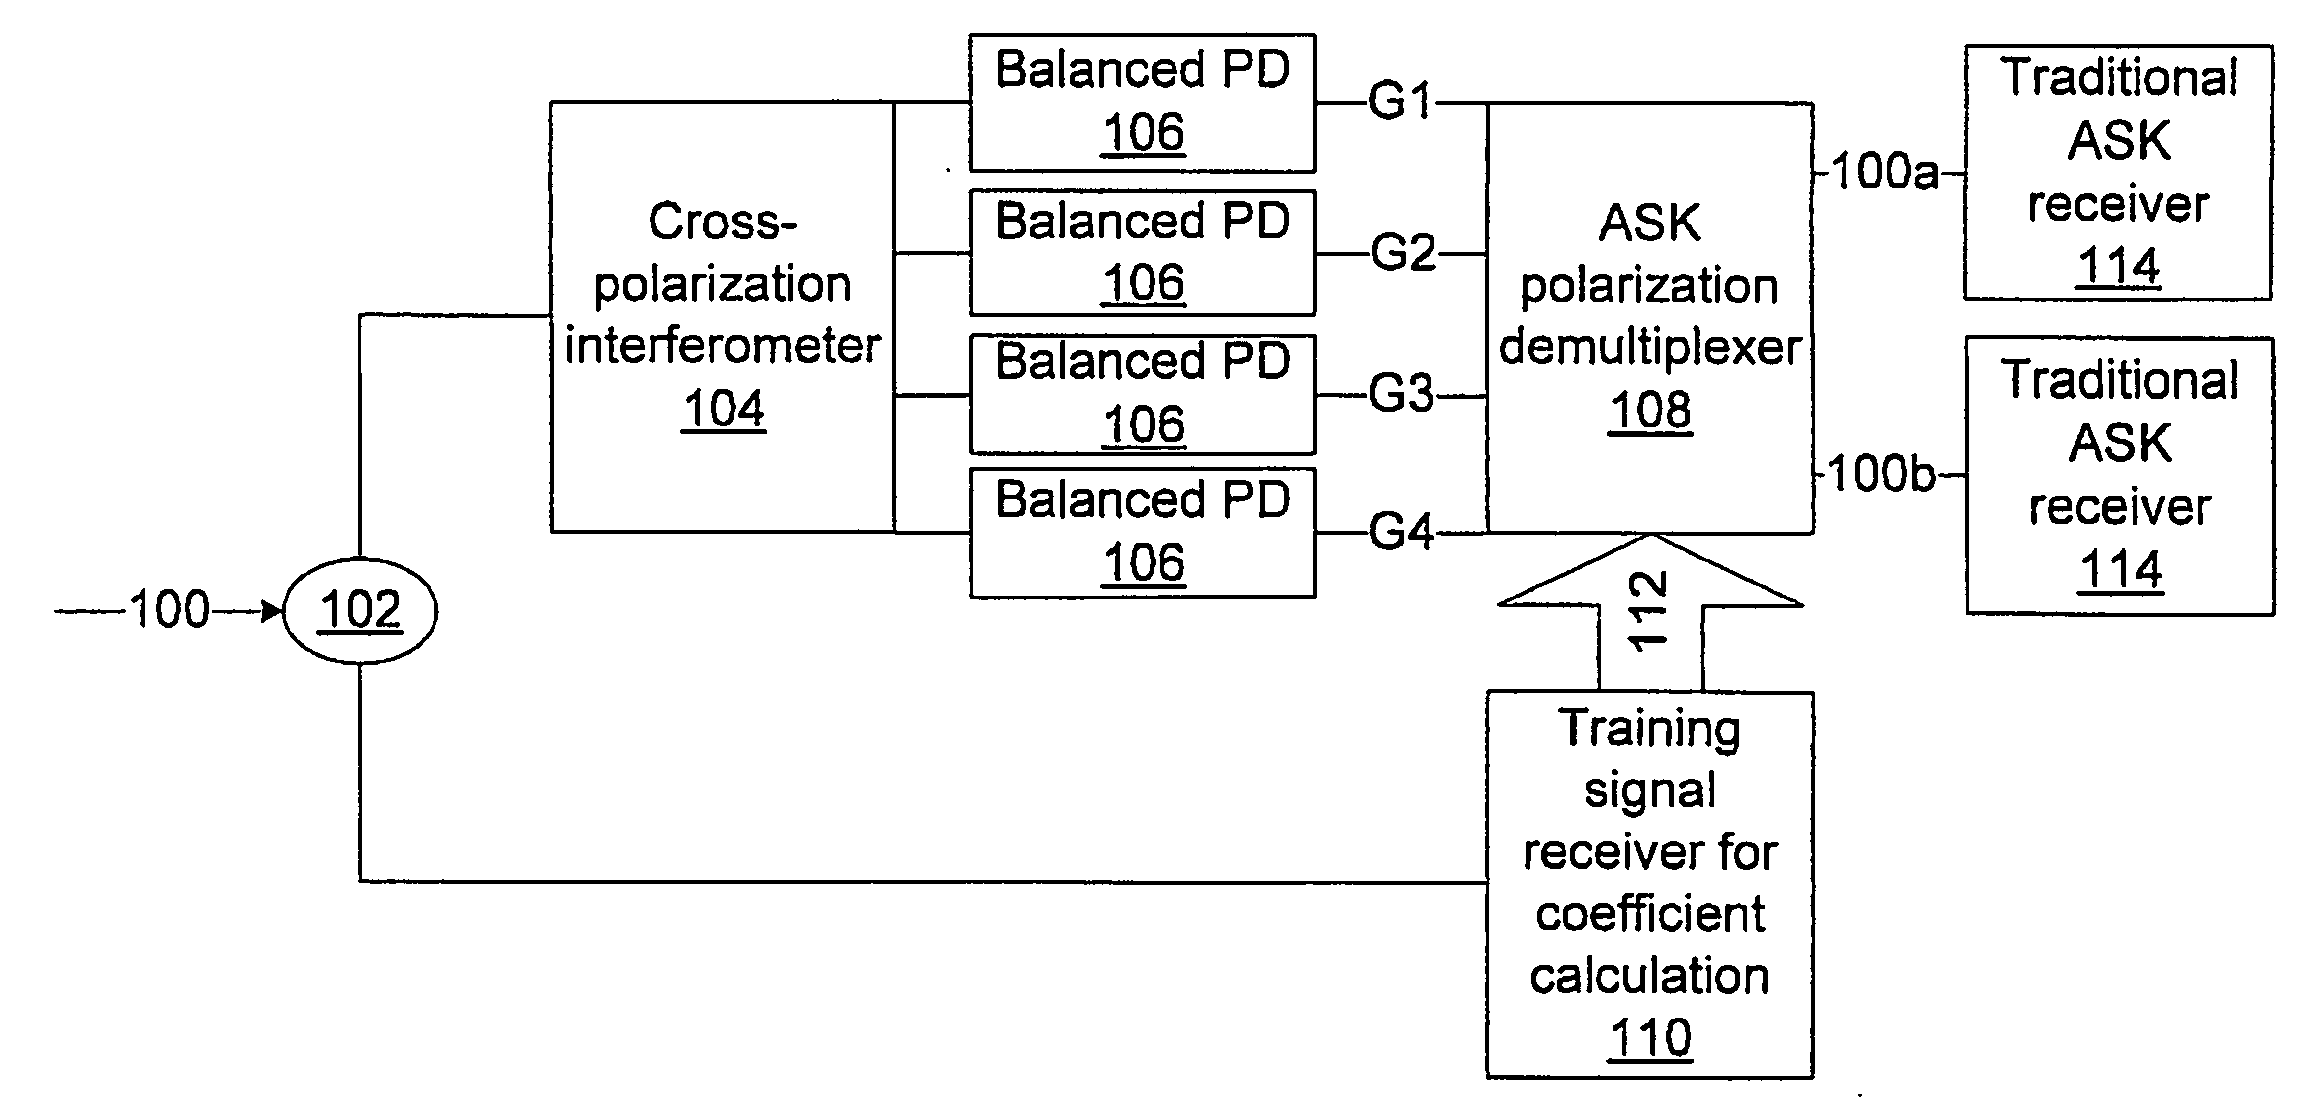 Direct detection receiver using cross-polarization interferometer for polmux-ask system